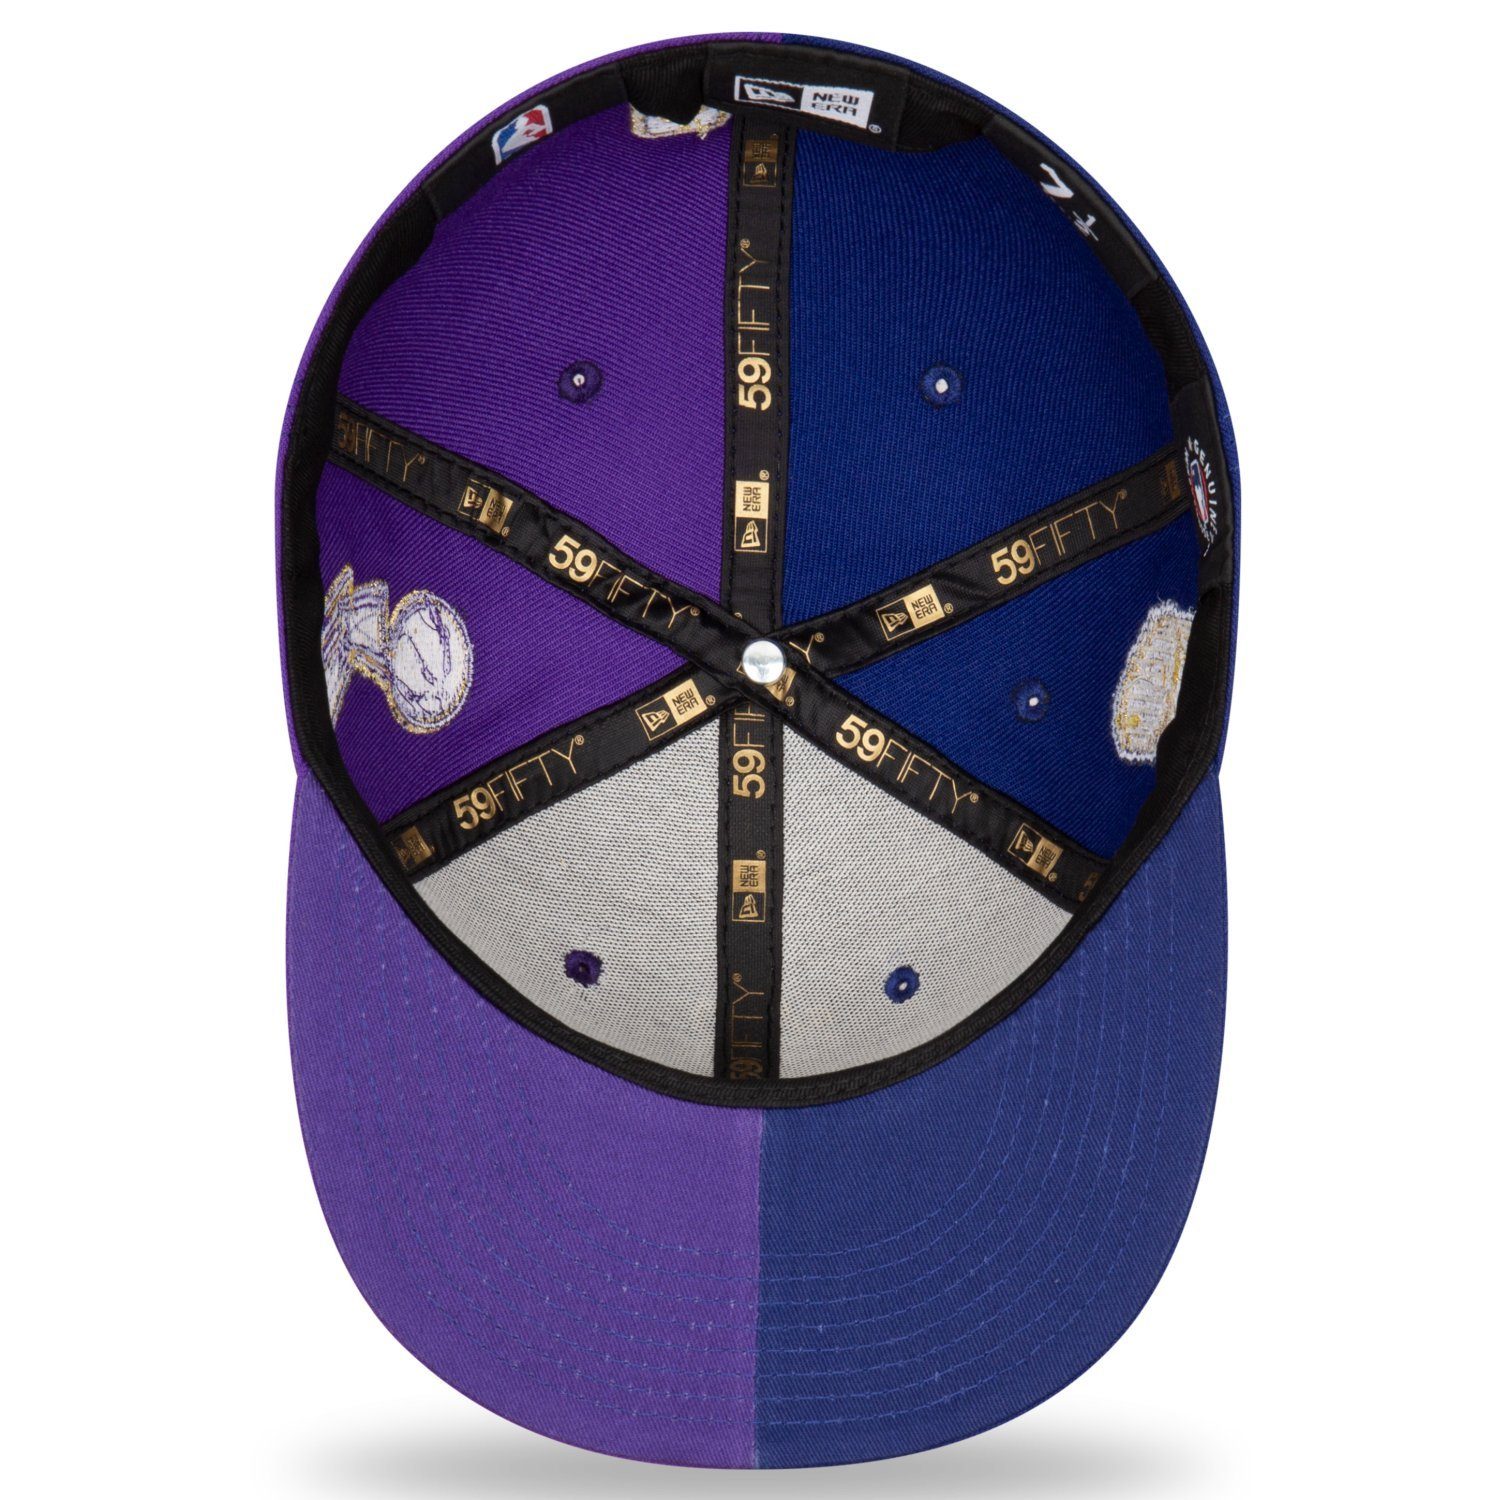 Fitted Dodgers 2020 New Cap & Lakers Era LA 59Fifty CHAMPS